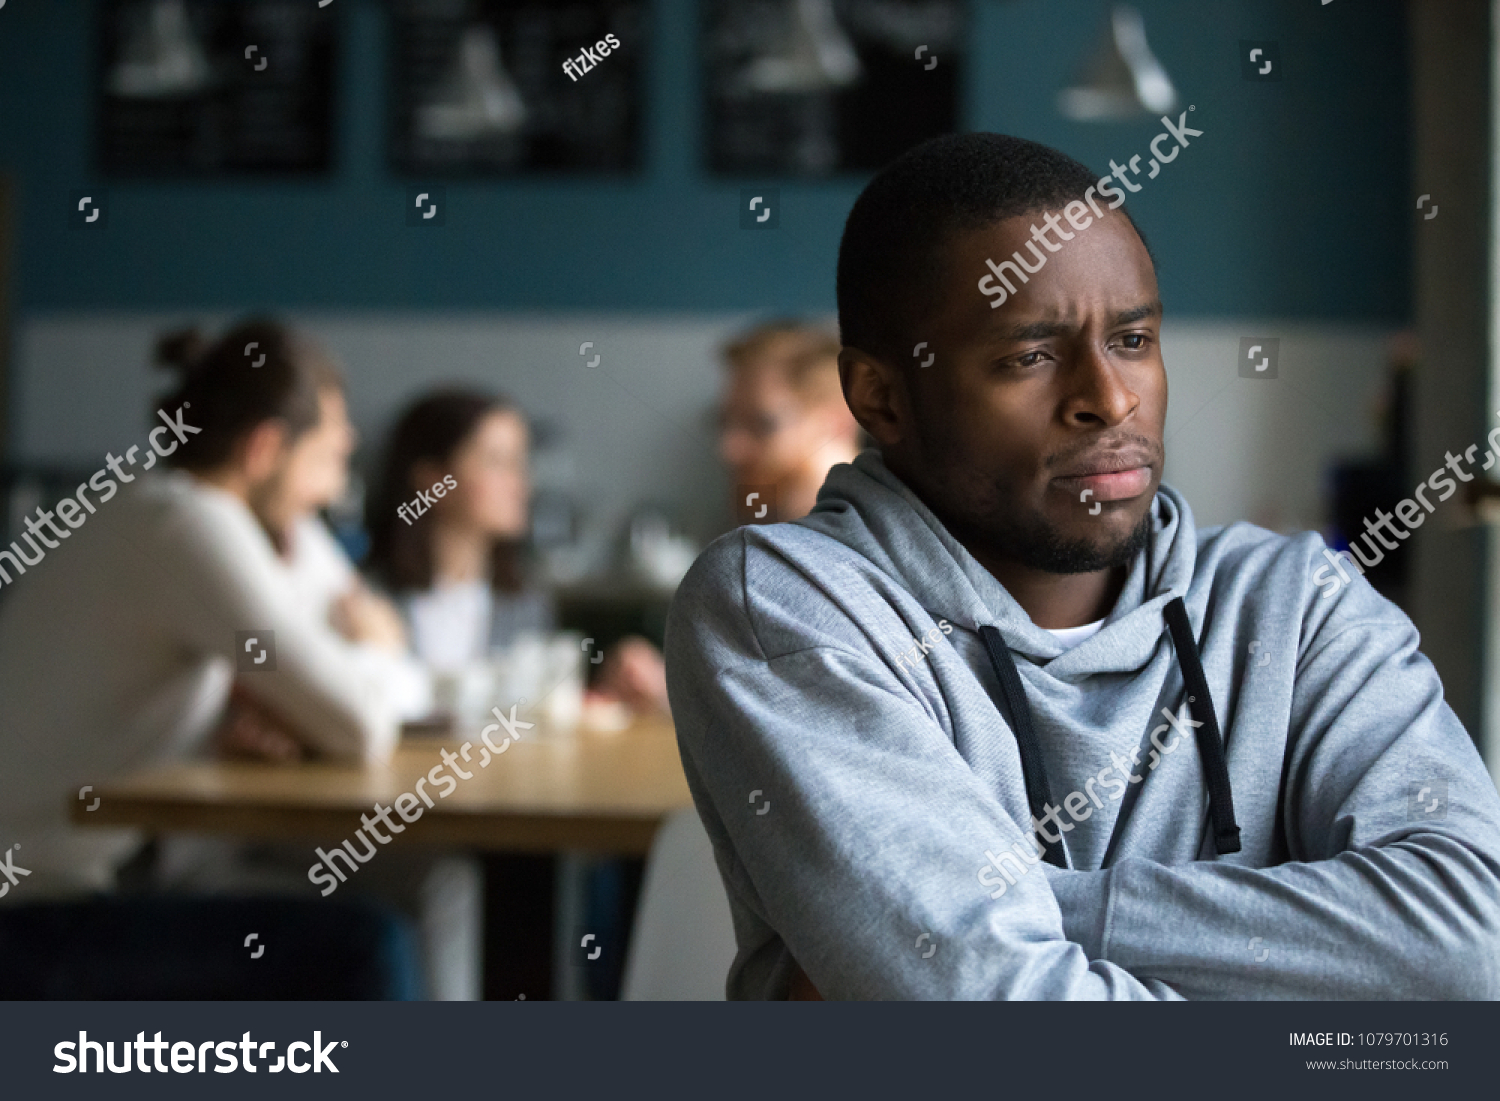 Frustrated excluded outstand african american man suffers from bullying or racial discrimination having no friends sitting alone in cafe, sad depressed black guy upset being rejected by white people #1079701316